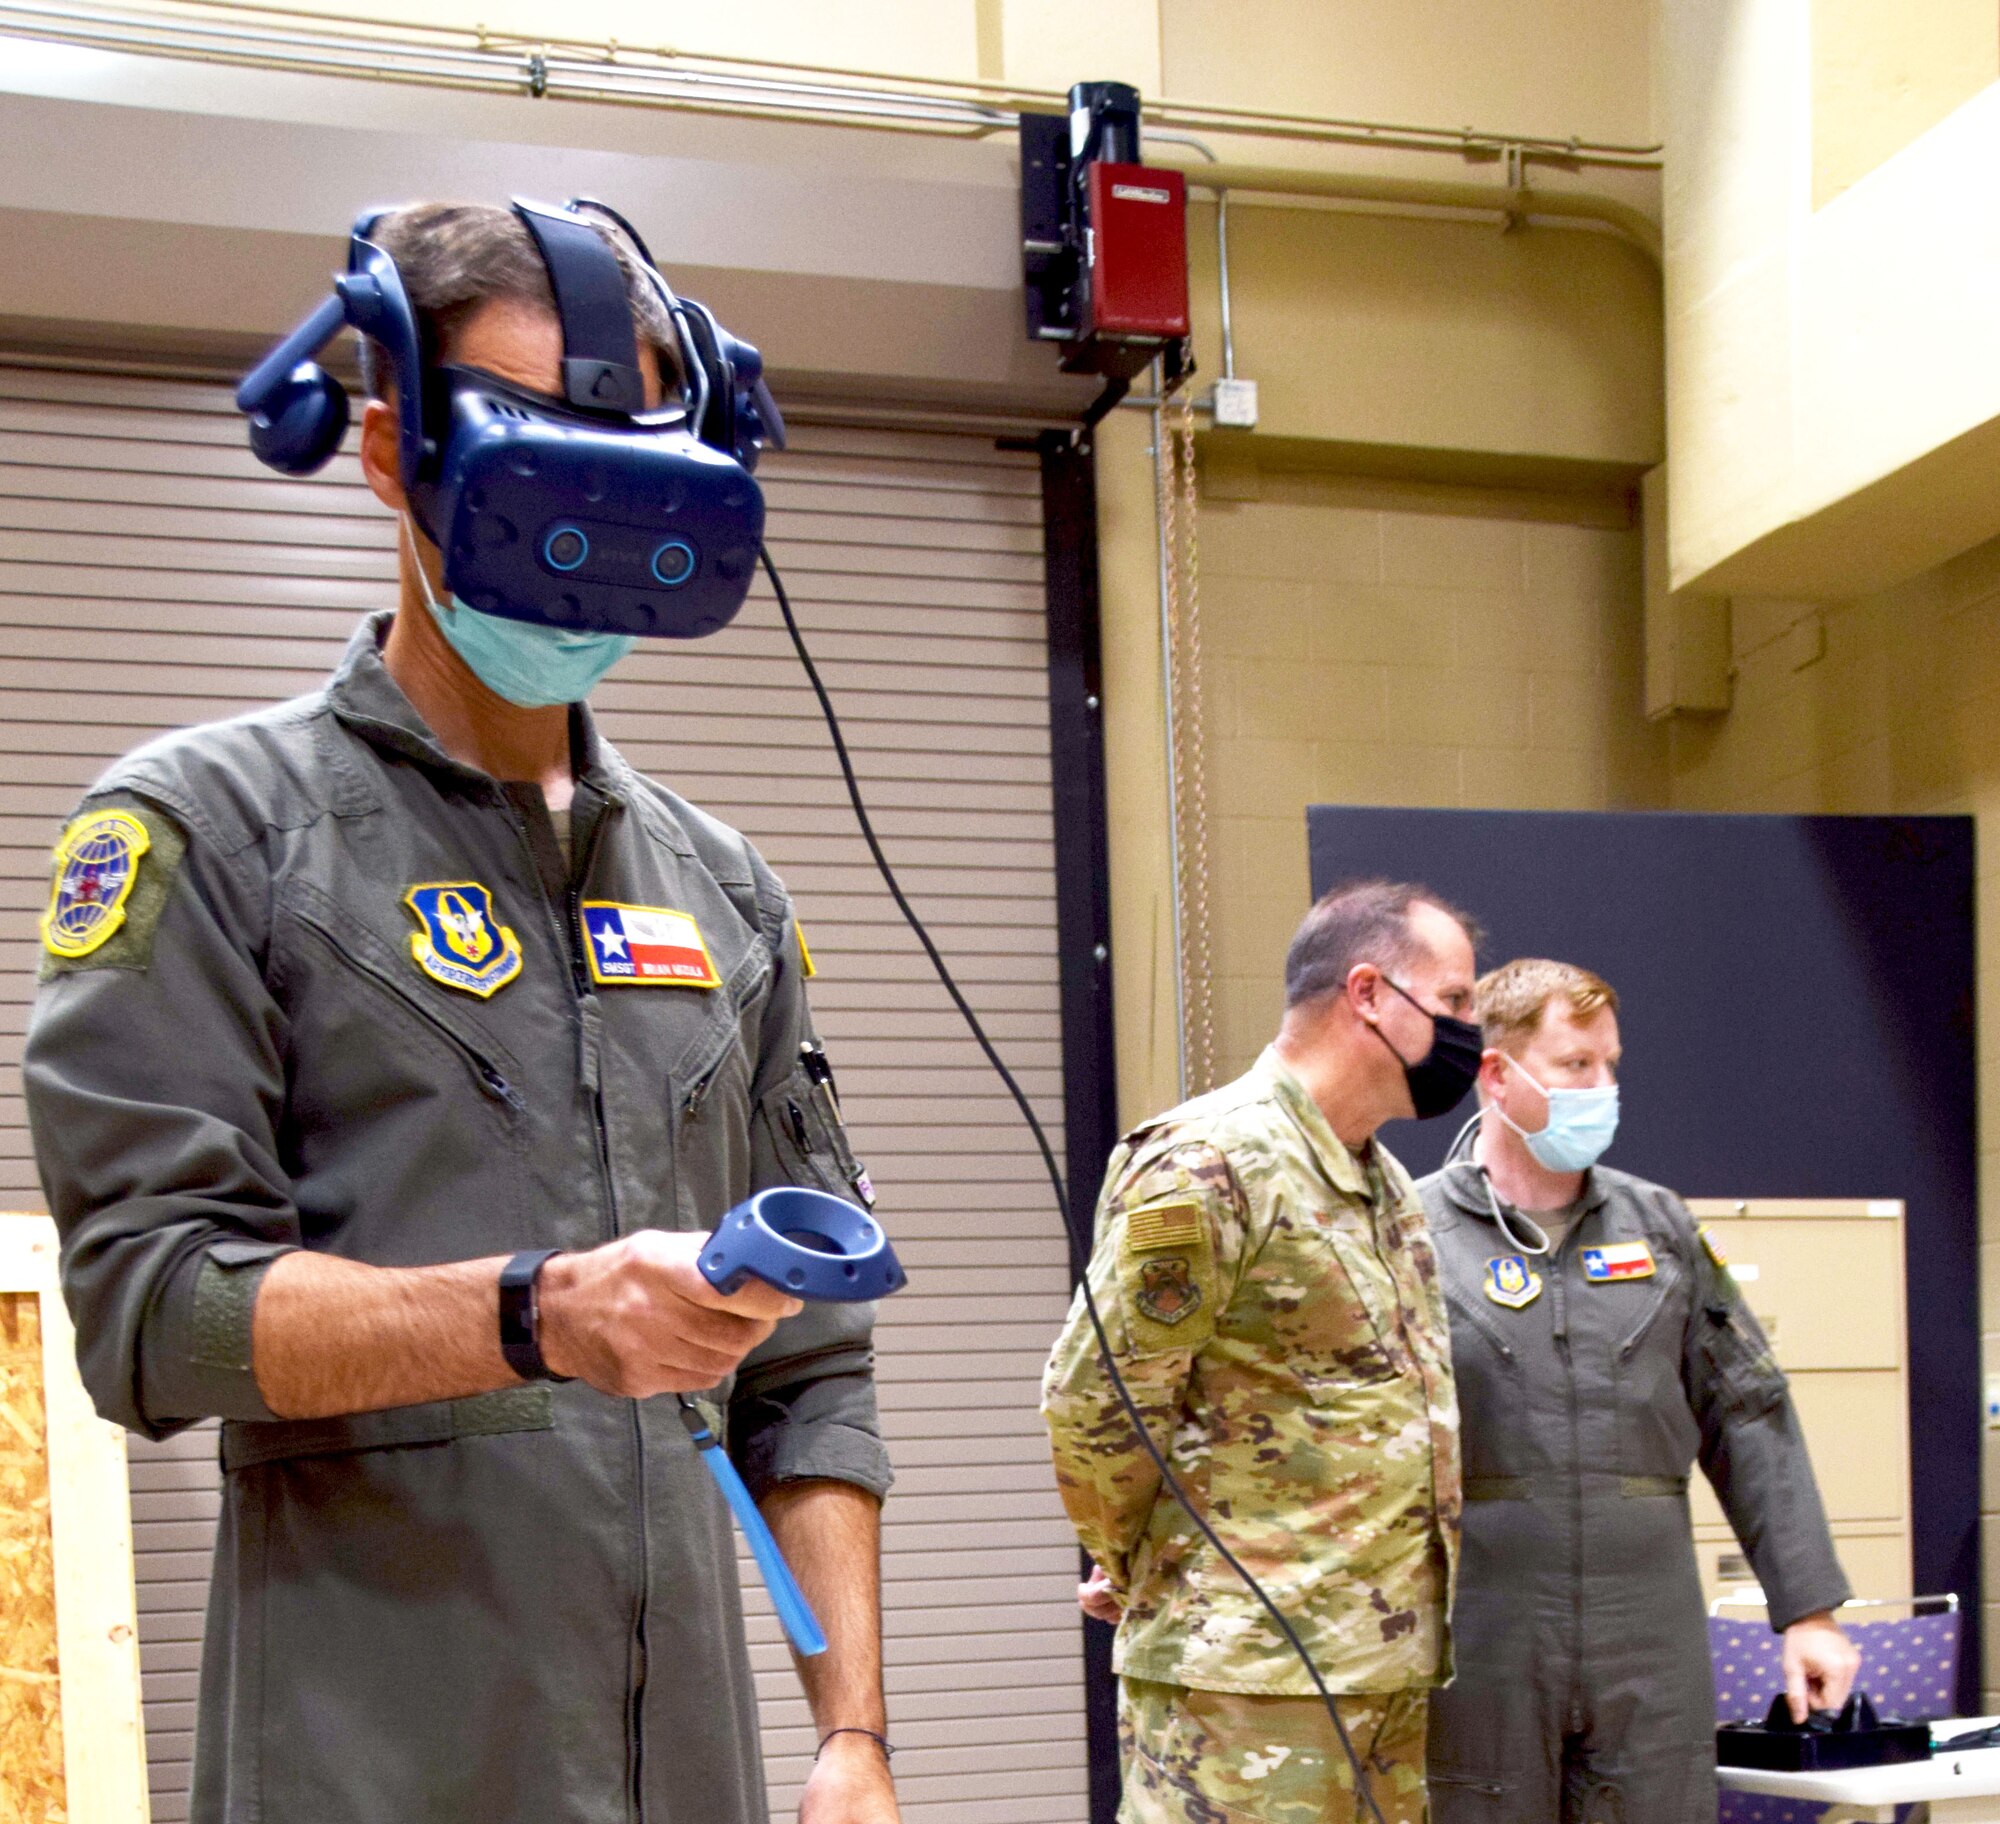 Senior Master Sgt. Brian Mizula, 733rd Training Squadron superintendent, demonstrates use of virtual reality equipment as a learning tool Oct. 14, 2021, while Maj. Gen. Kenneth Bibb Jr., 18th Air Force commander, receives a brief from Maj. Paul Lentz, 733rd TRS student flight commander, at Joint Base San Antonio-Lackland, Texas. (U.S. Air Force photo by Lt. Col. Tim Wade)